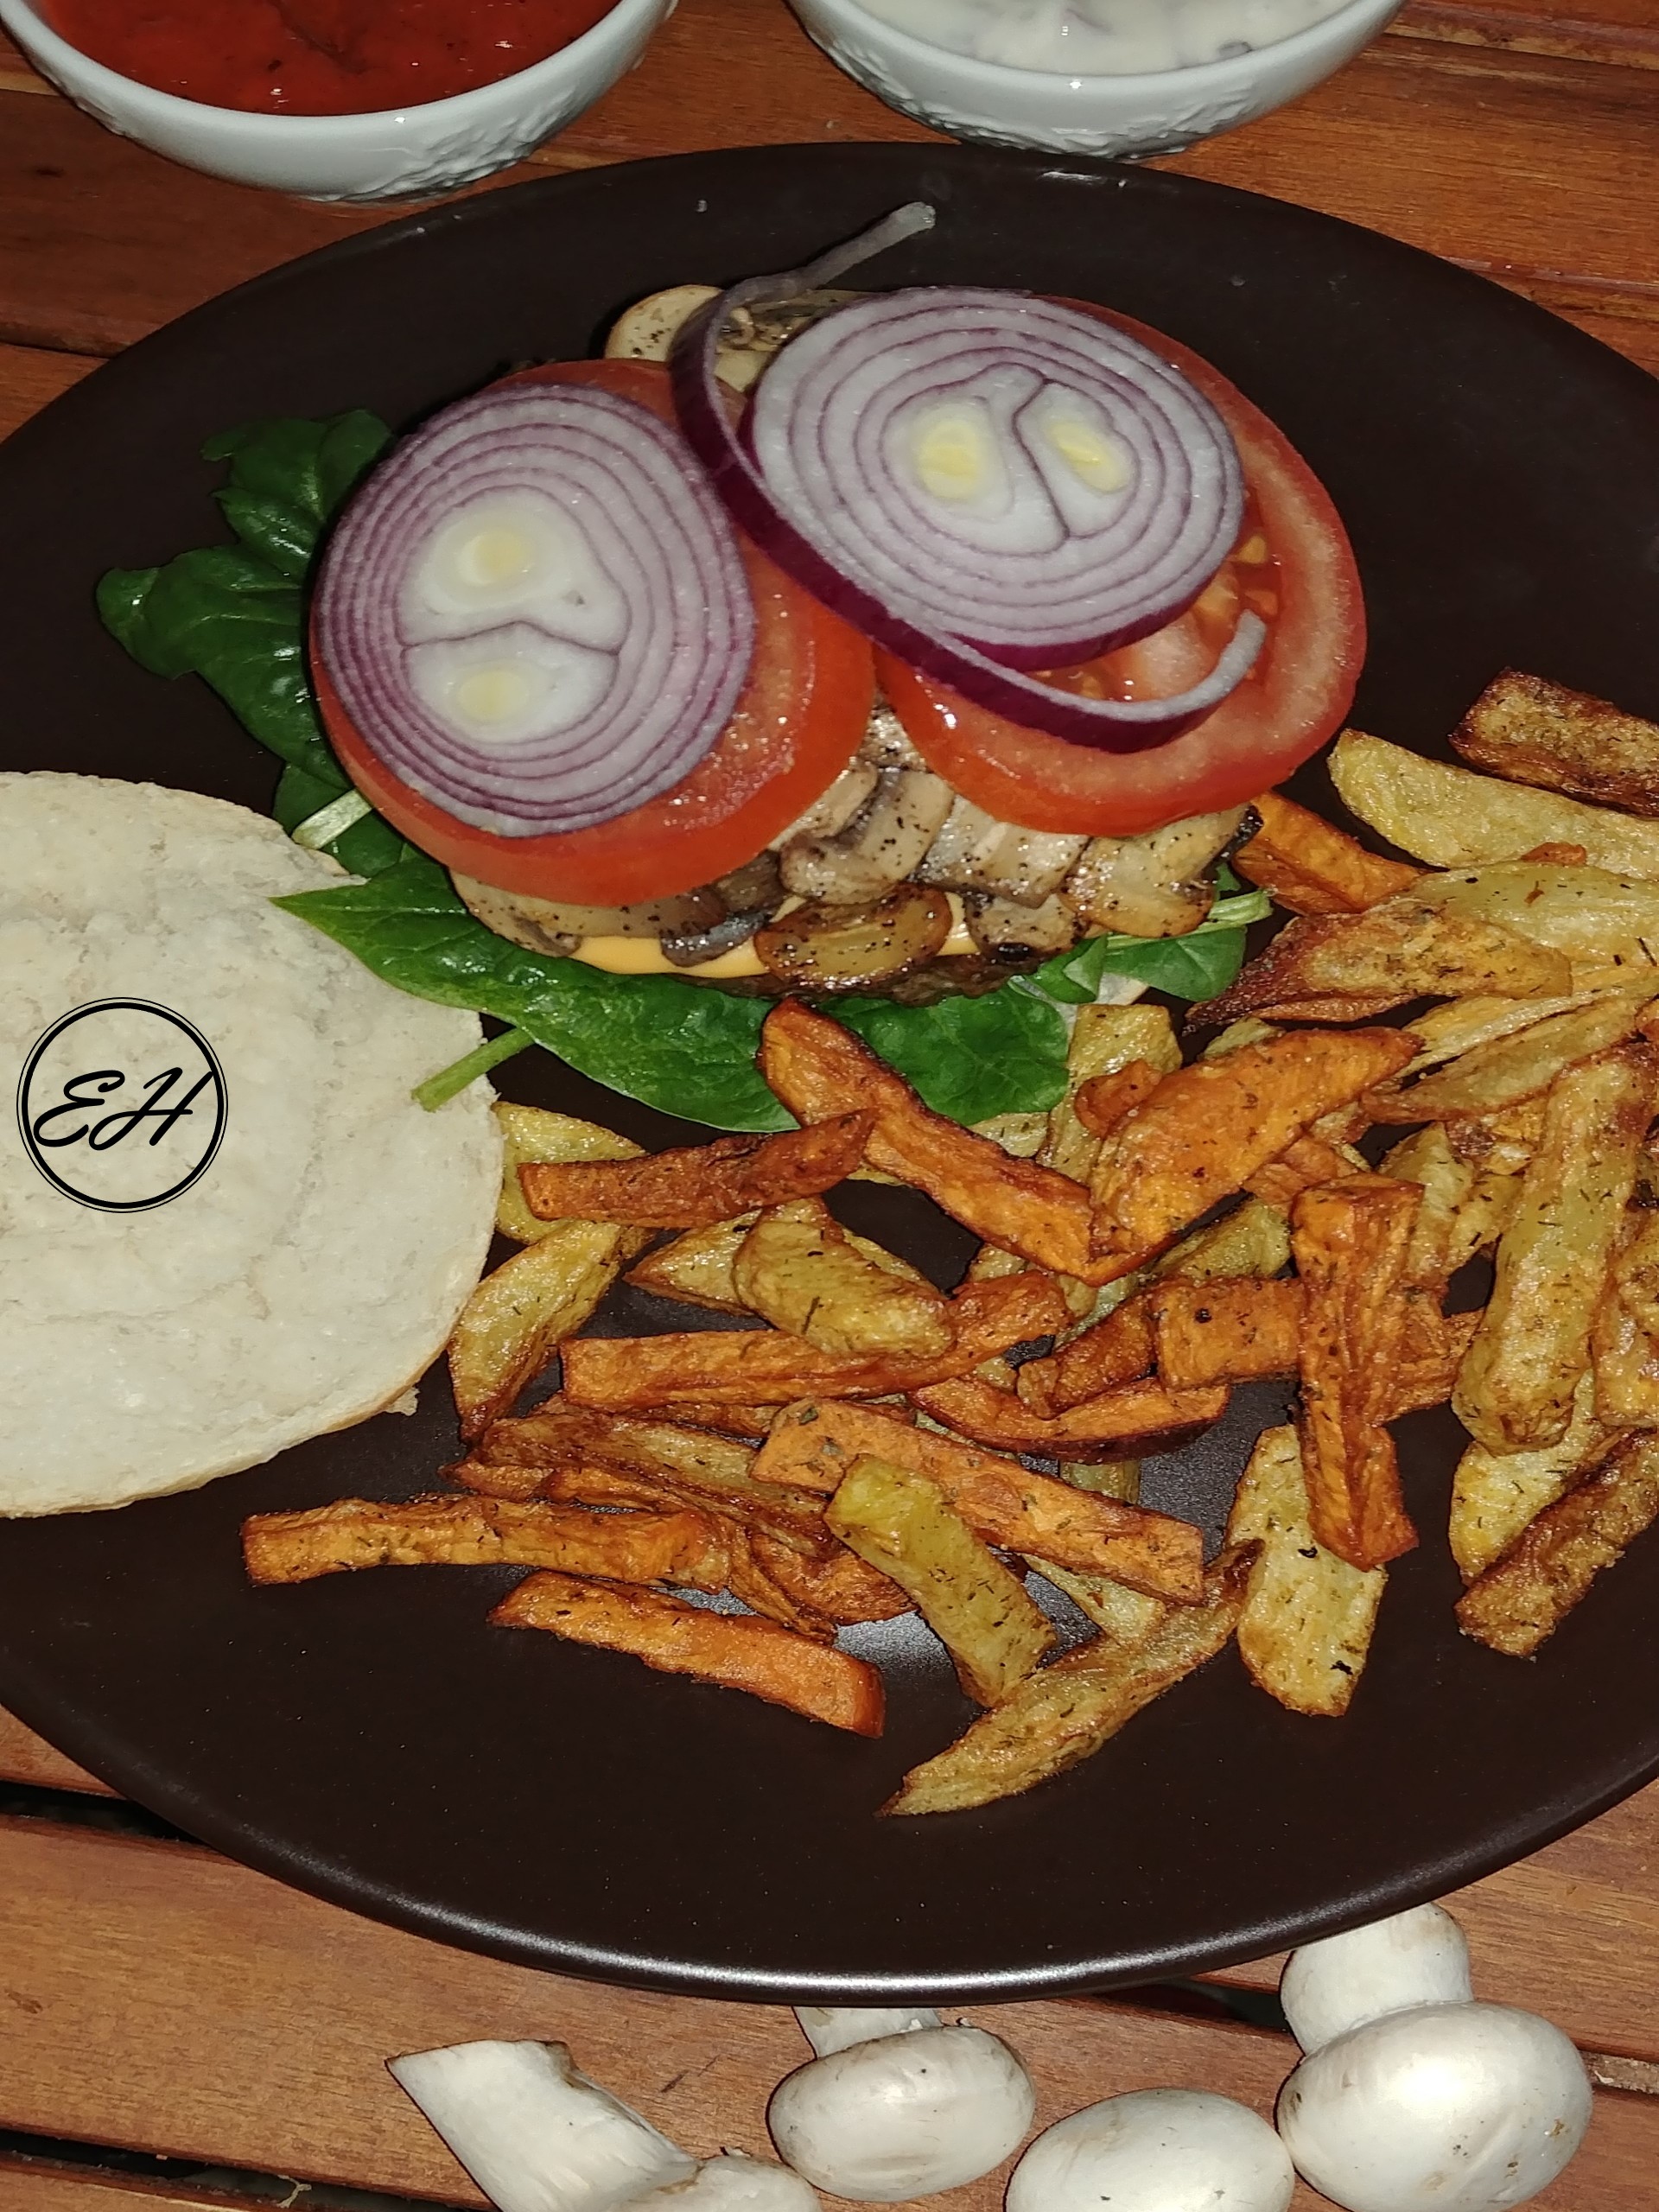 Hamburgers with potatoes and sweet potatoes mix - Extravagance House